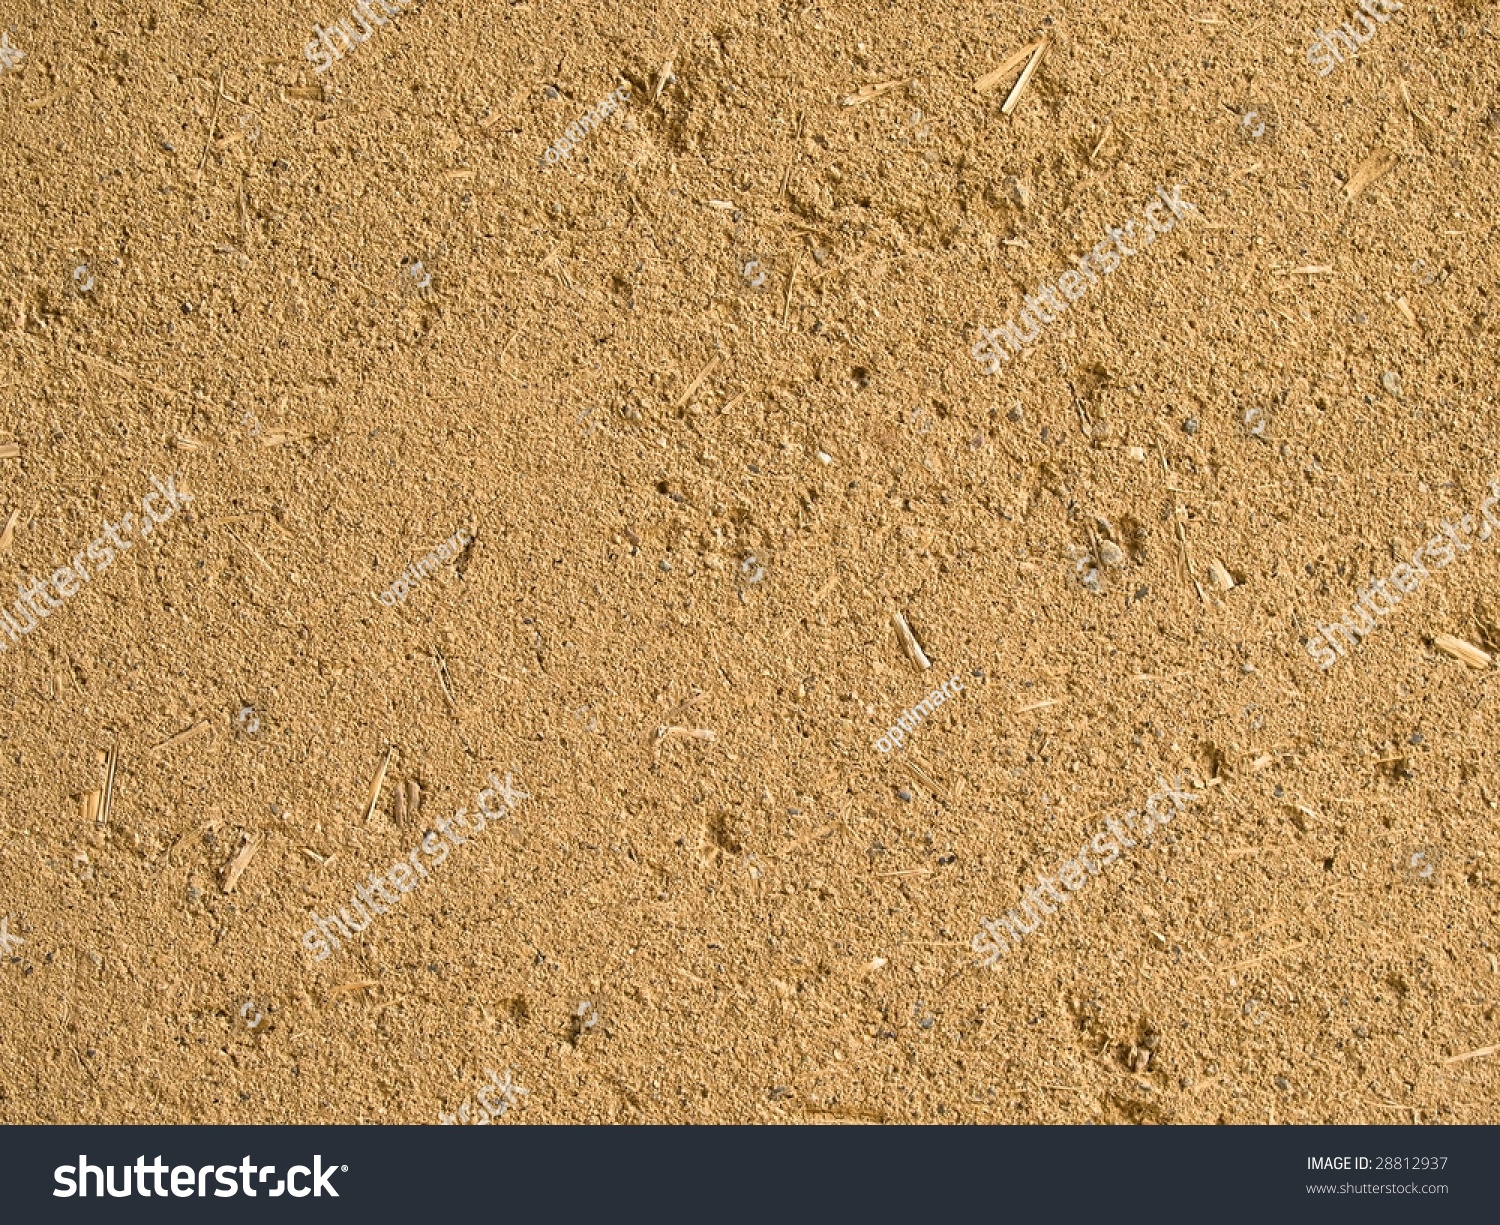 Real Clay Wall Texture. Stock Photo 28812937 : Shutterstock